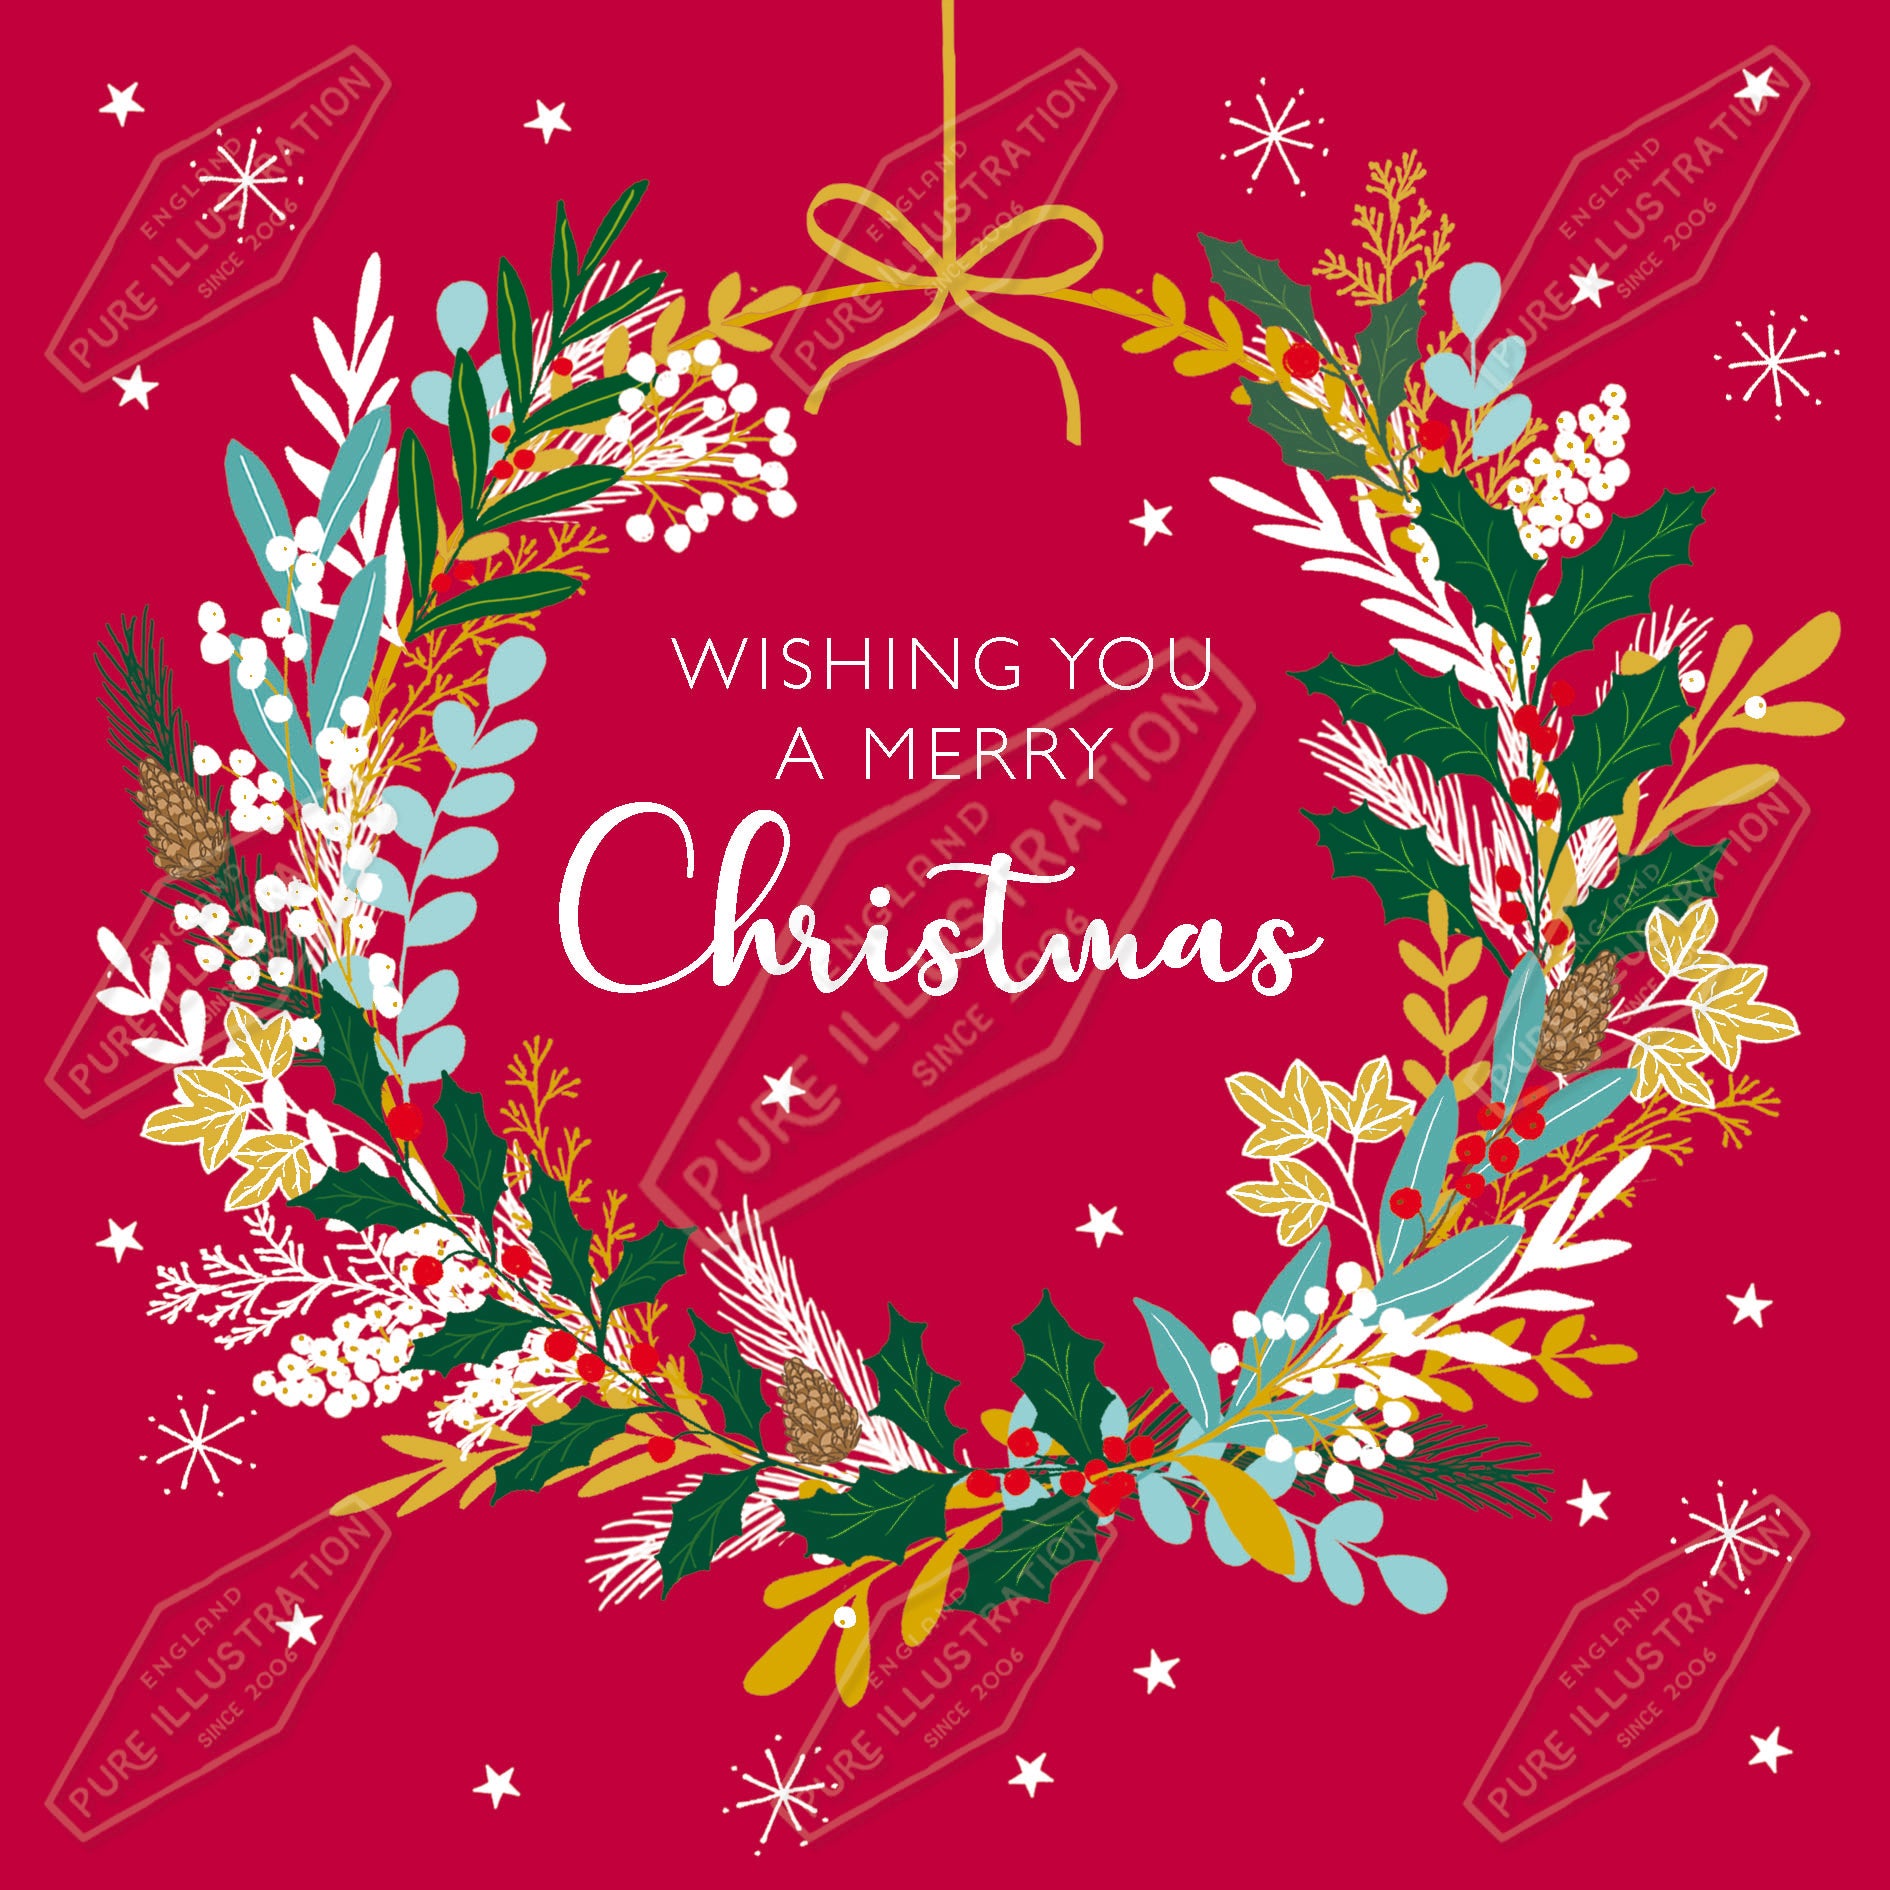 00035573CMI - Caitlin Miller is represented by Pure Art Licensing Agency - Christmas Greeting Card Design